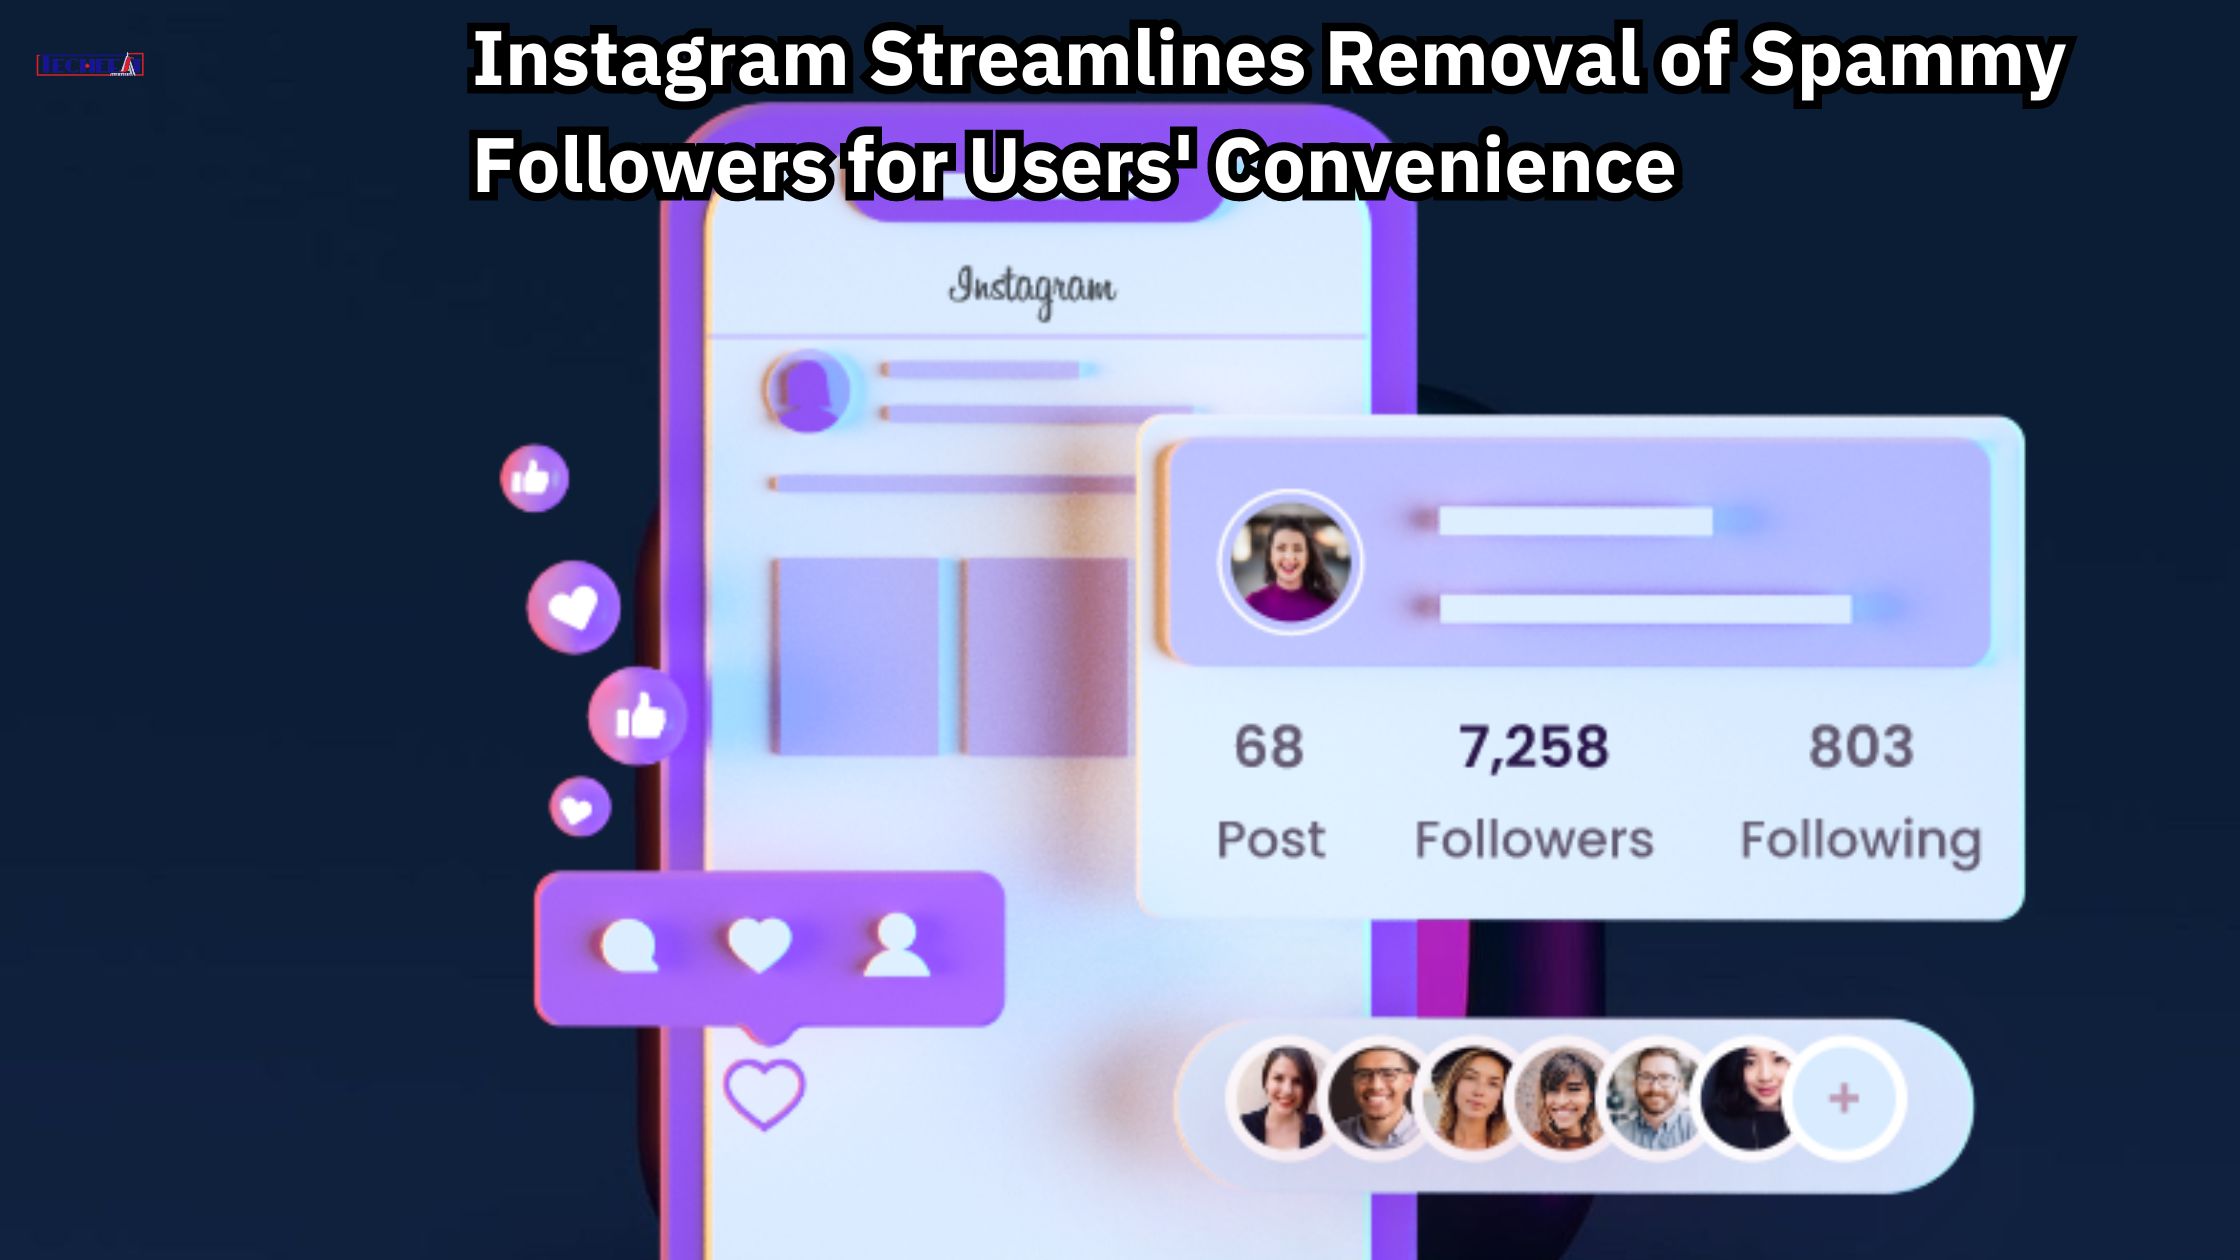 Instagram Streamlines Removal of Spammy Followers for Users' Convenience